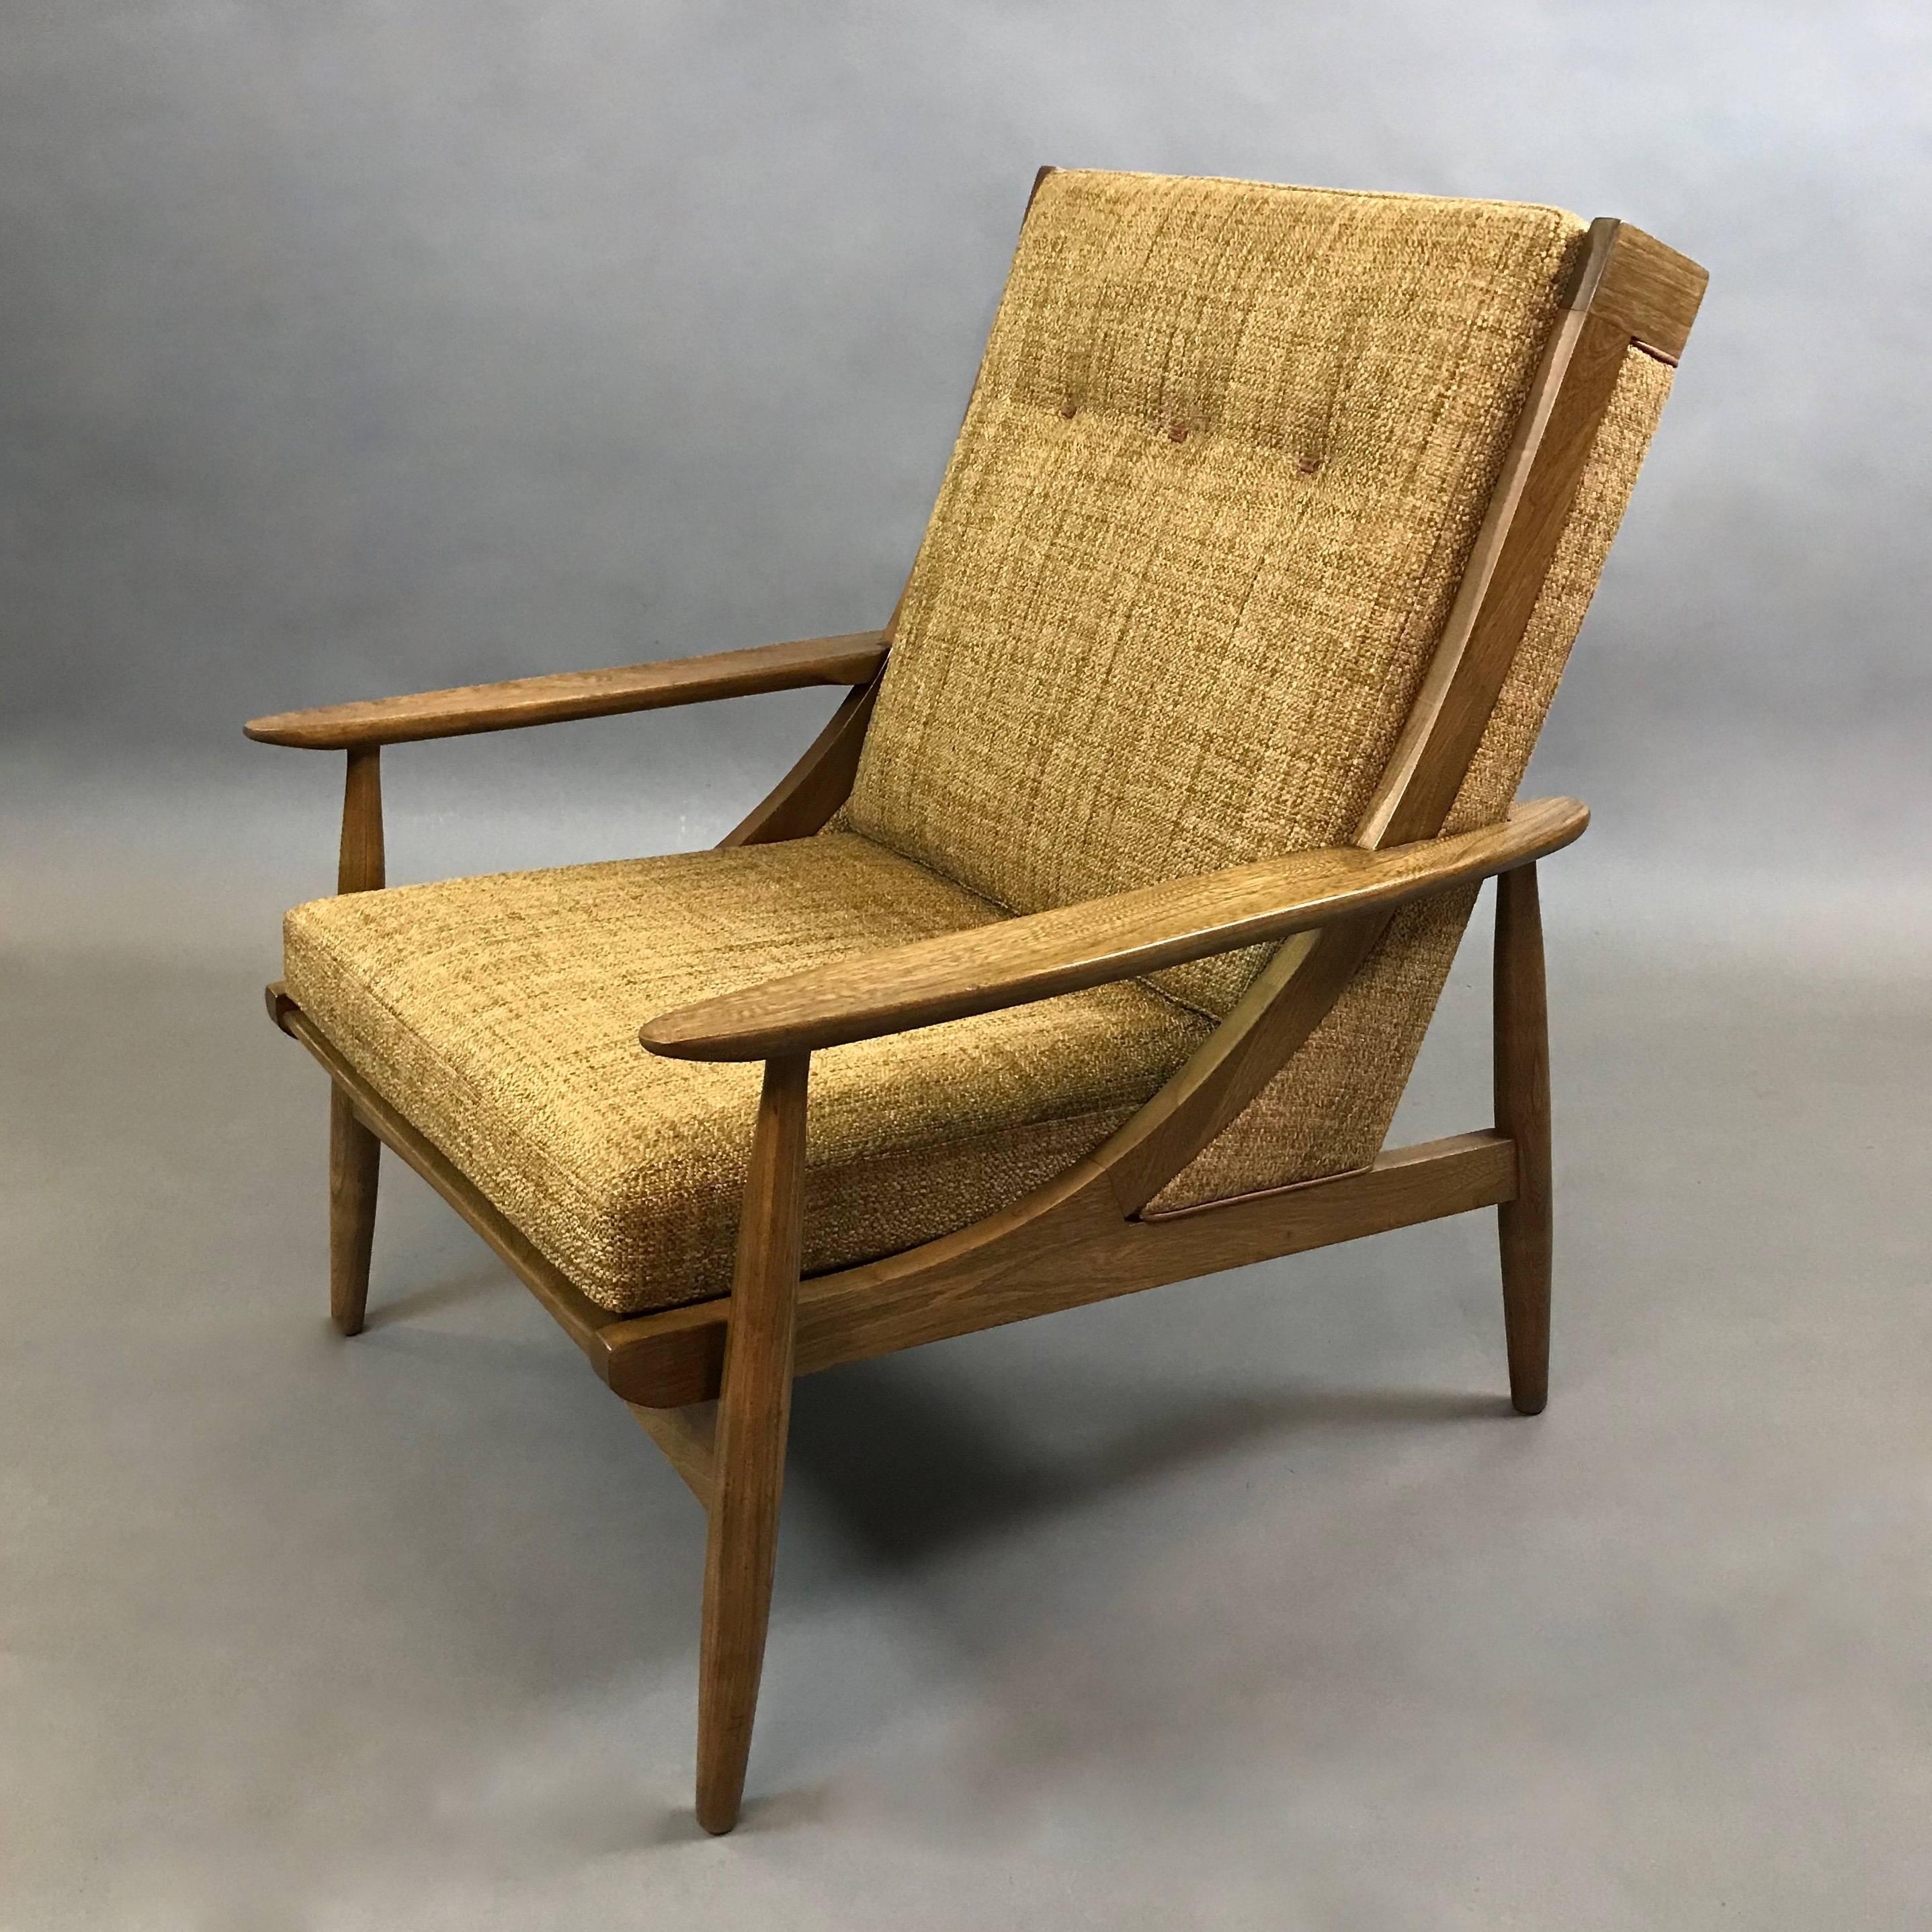 Italian, mid century modern, high, slat back, lounge chair features an ash frame with attached butterscotch tweed blend upholstery accented by tan leather trim and custom leather button details - a stunning chair from all angles.